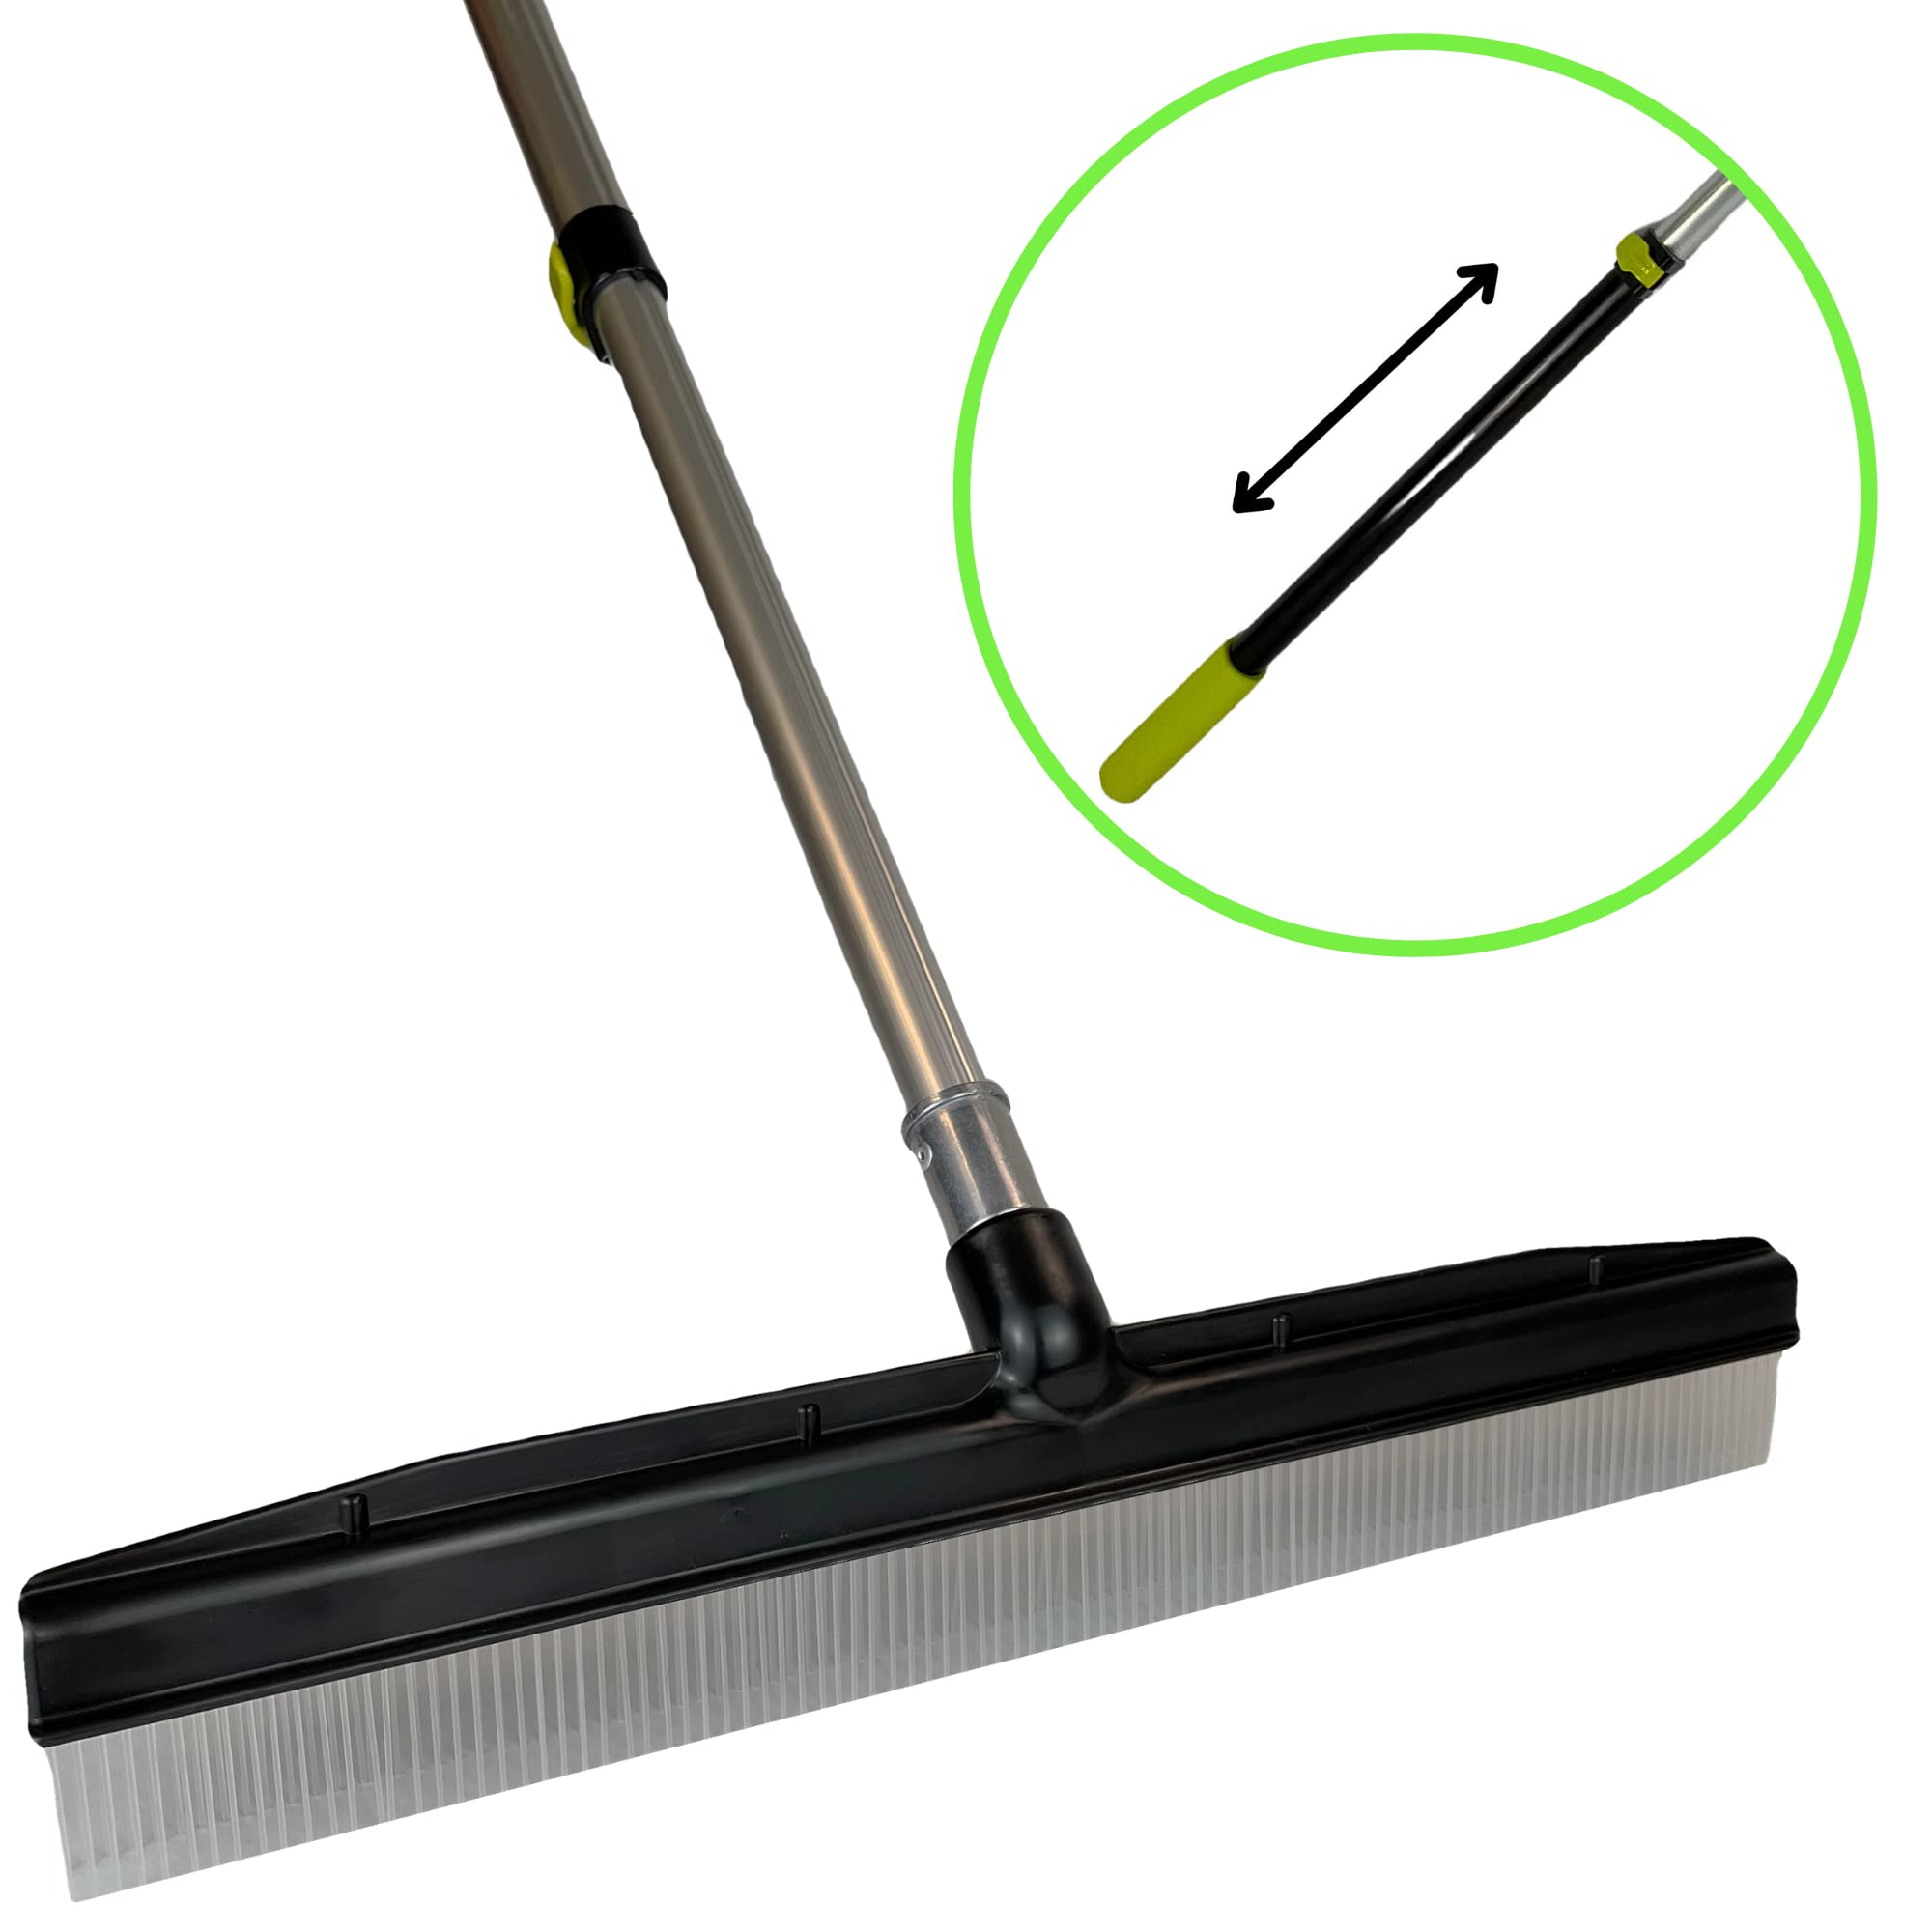 A-to-Z Supply Room Groom Carpet Rake And Groomer With Telescoping 54 Inch Adjustable Handle, Portable Design, Carpet Brush Ideal For Pet Hair,